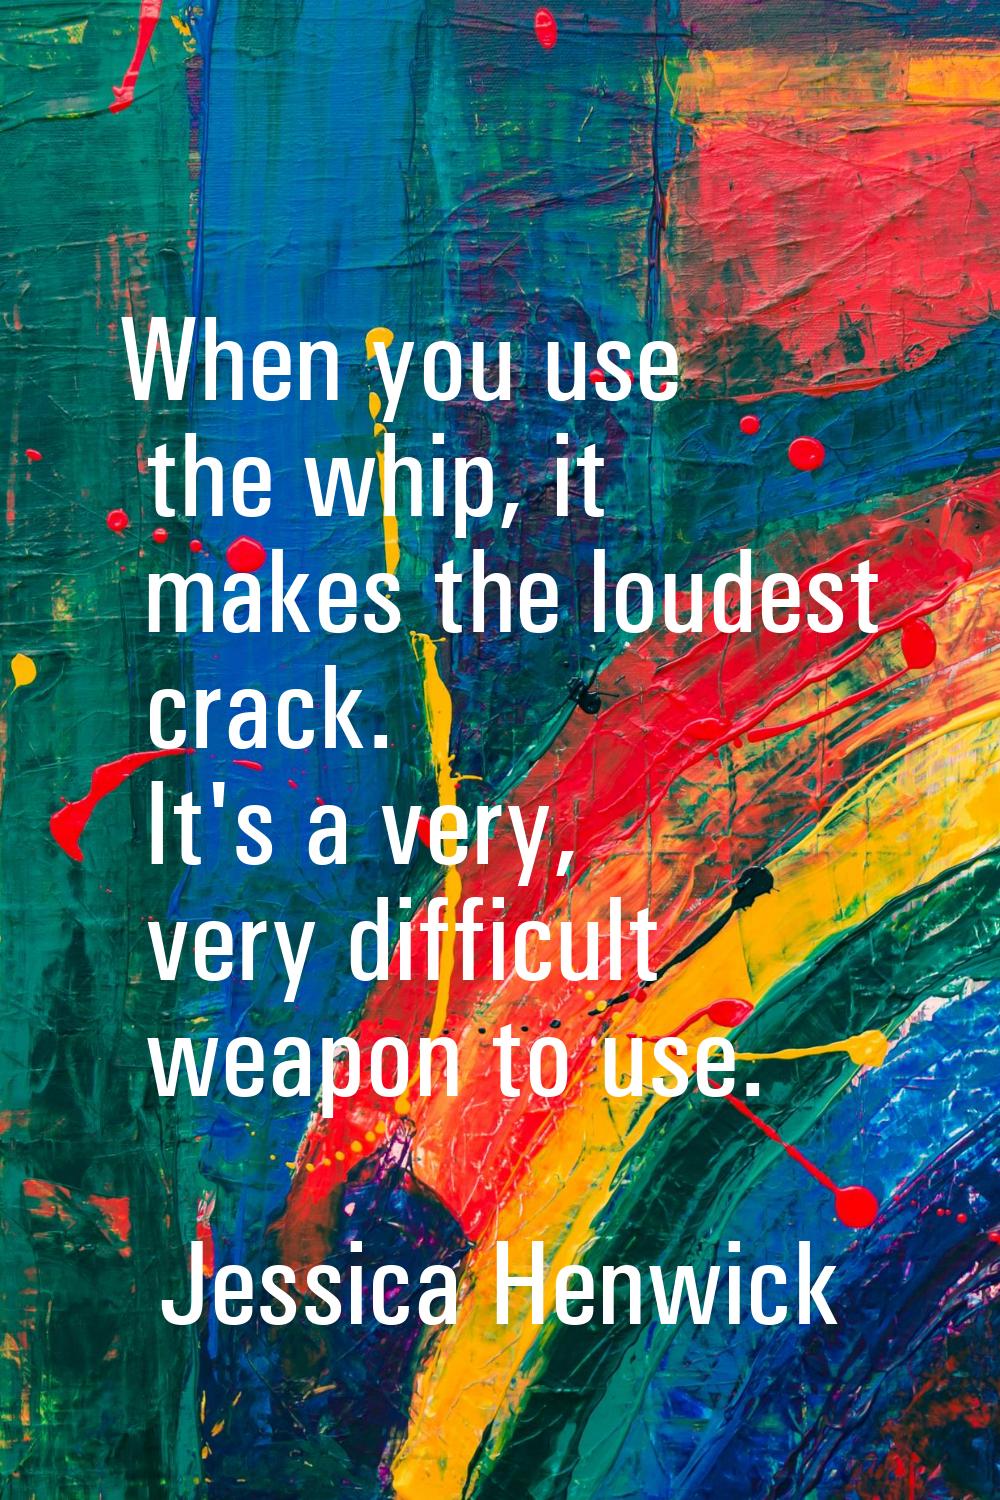 When you use the whip, it makes the loudest crack. It's a very, very difficult weapon to use.